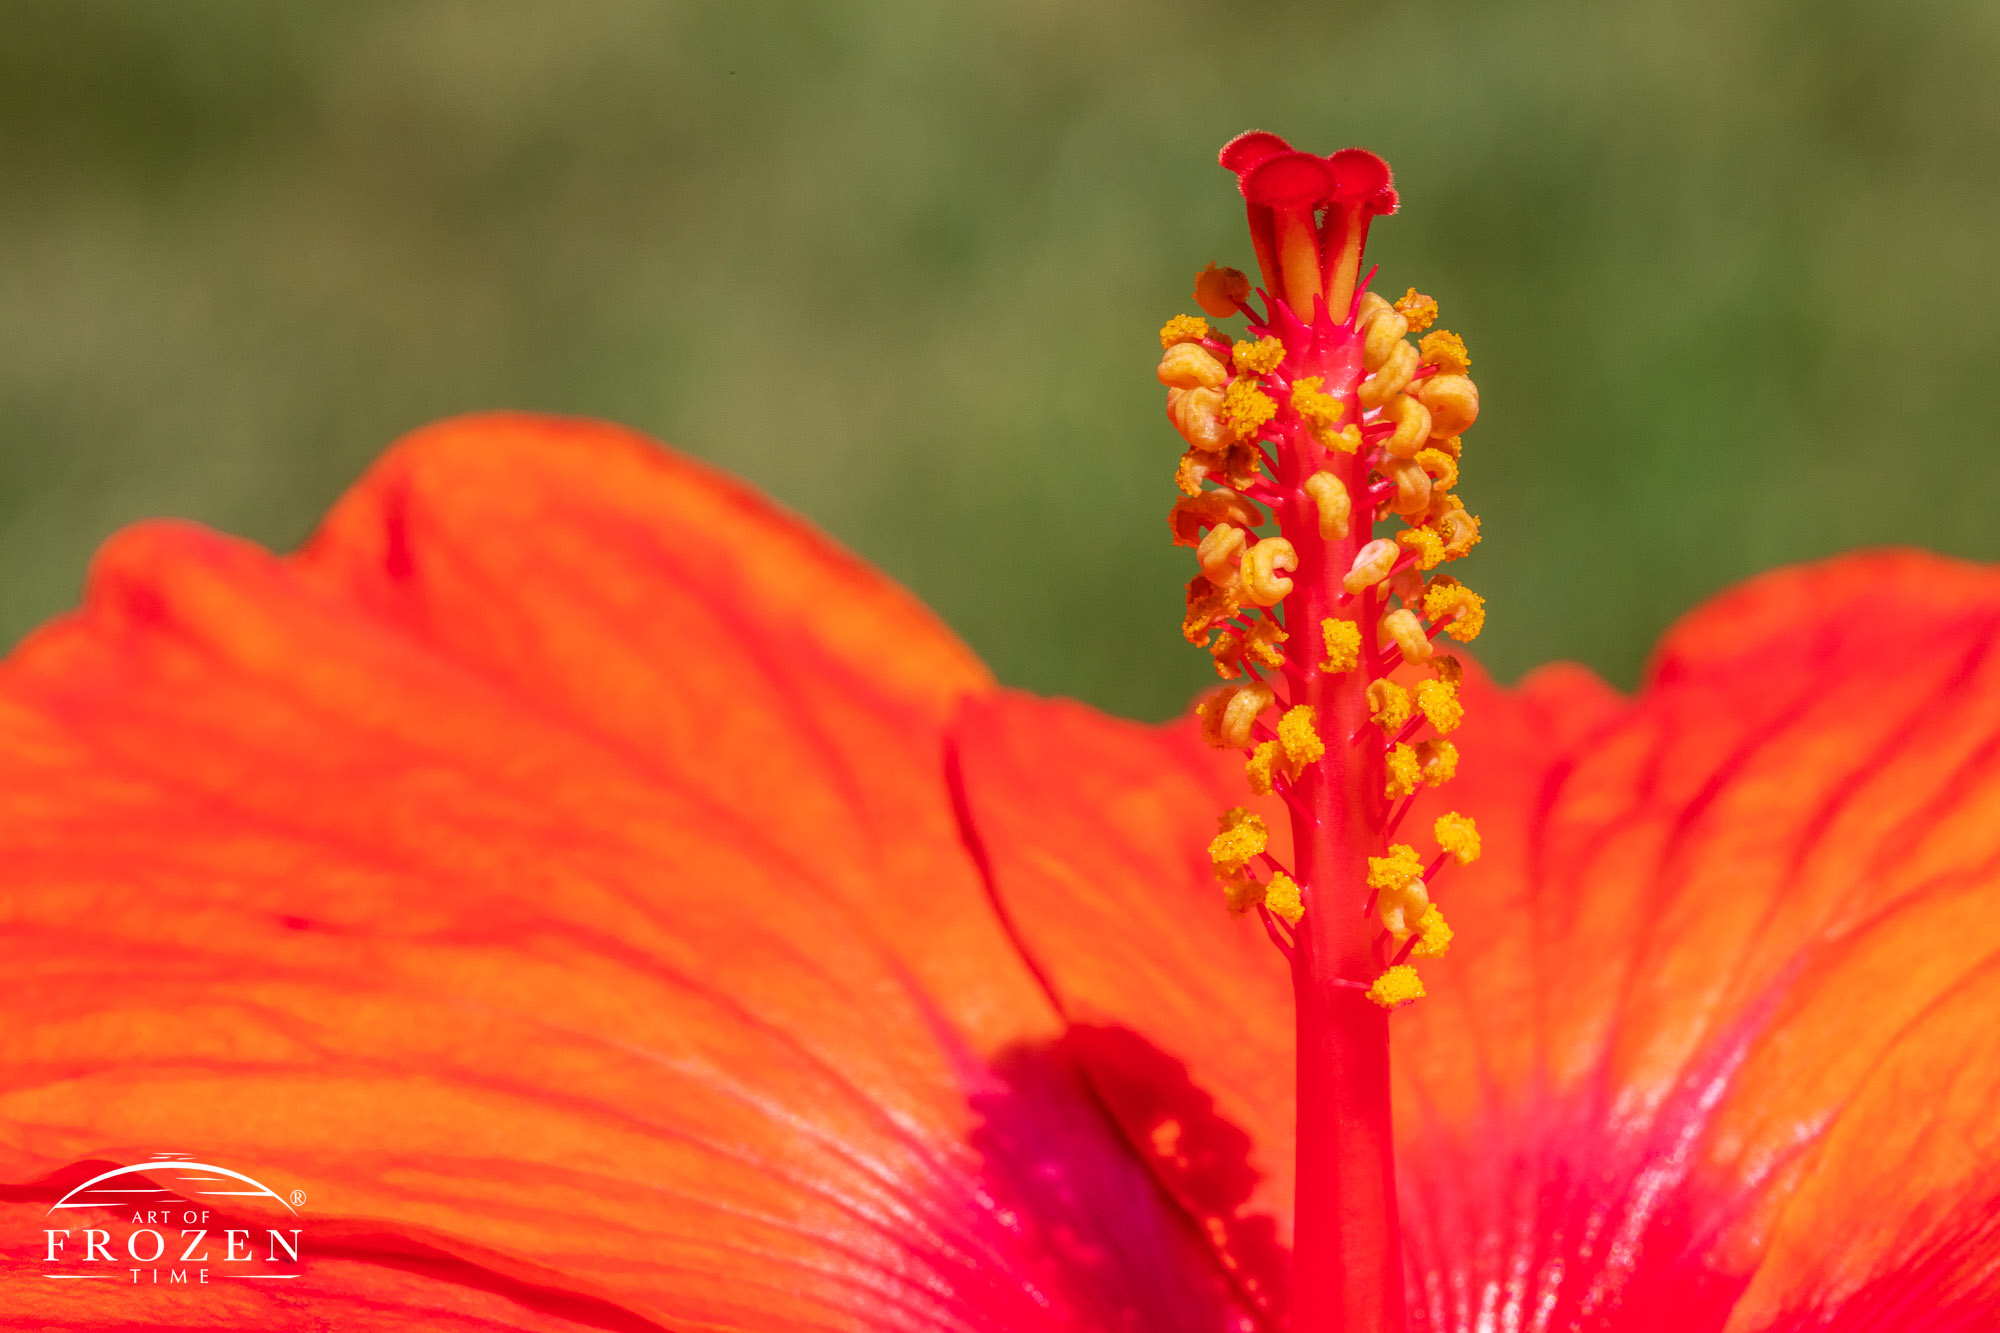 A side view of the Hawaiian Orange Lagas Hibiscus which displays large orange leaves with a hot pink center